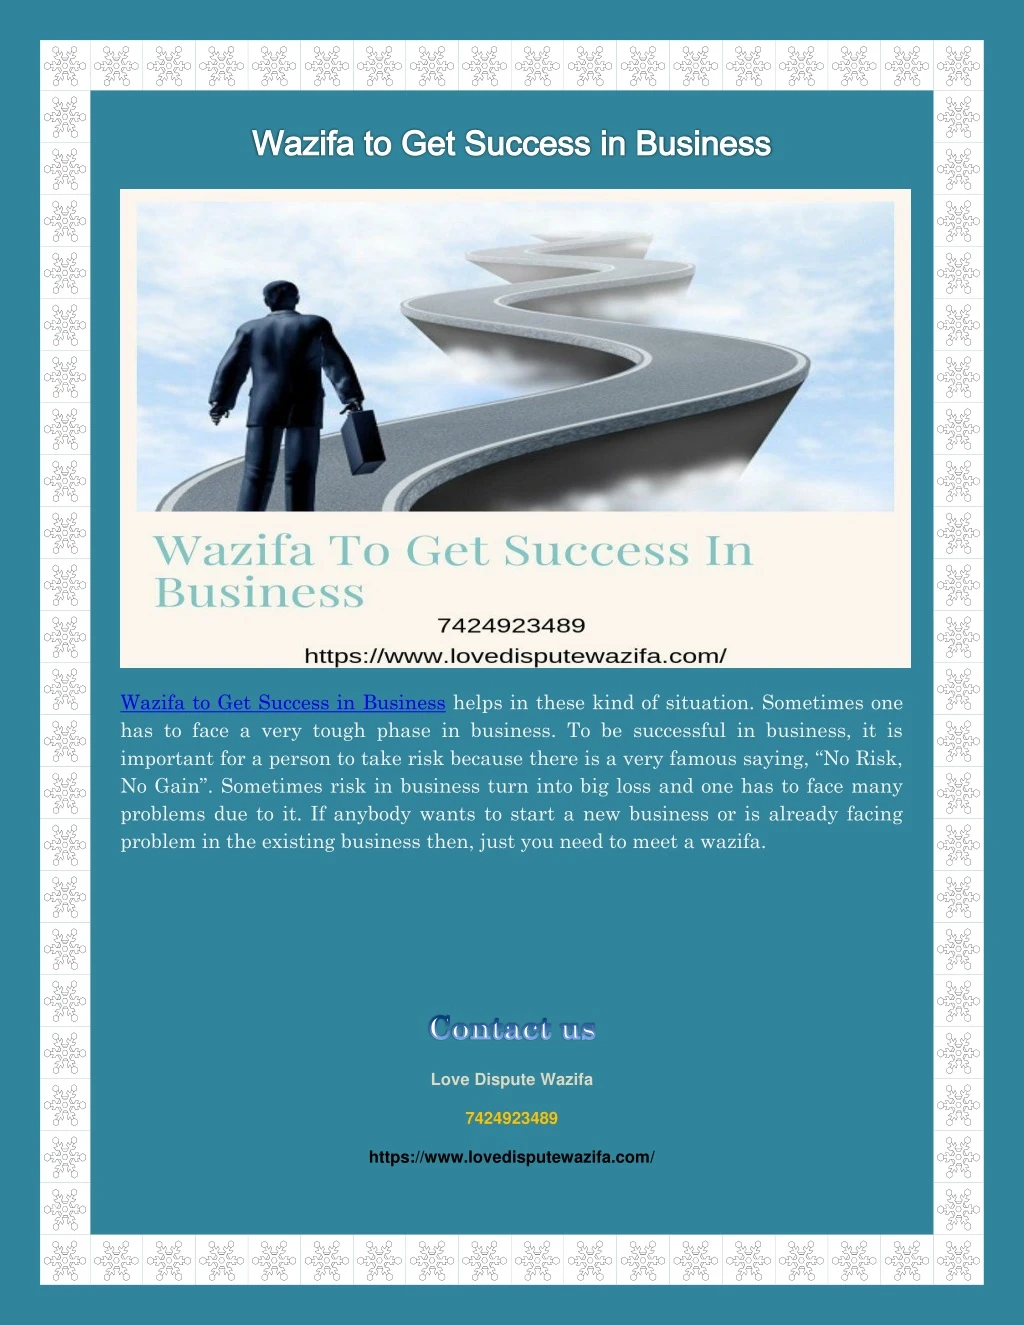 wazifa to get success in business helps in these